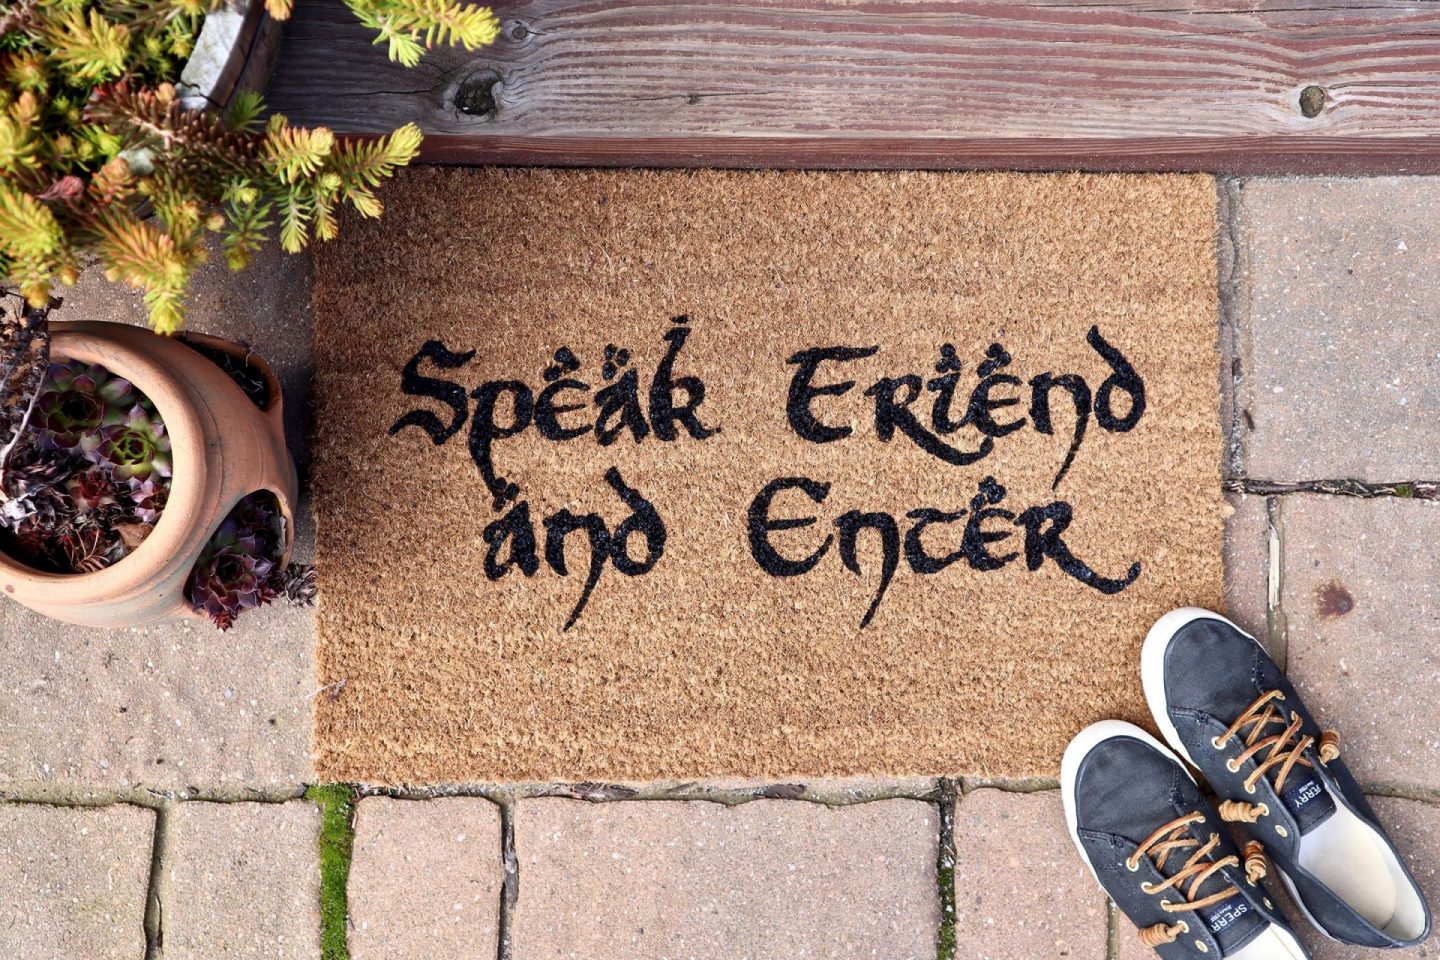 doormat reads 'speak friend and enter' with shoes and plants nearby